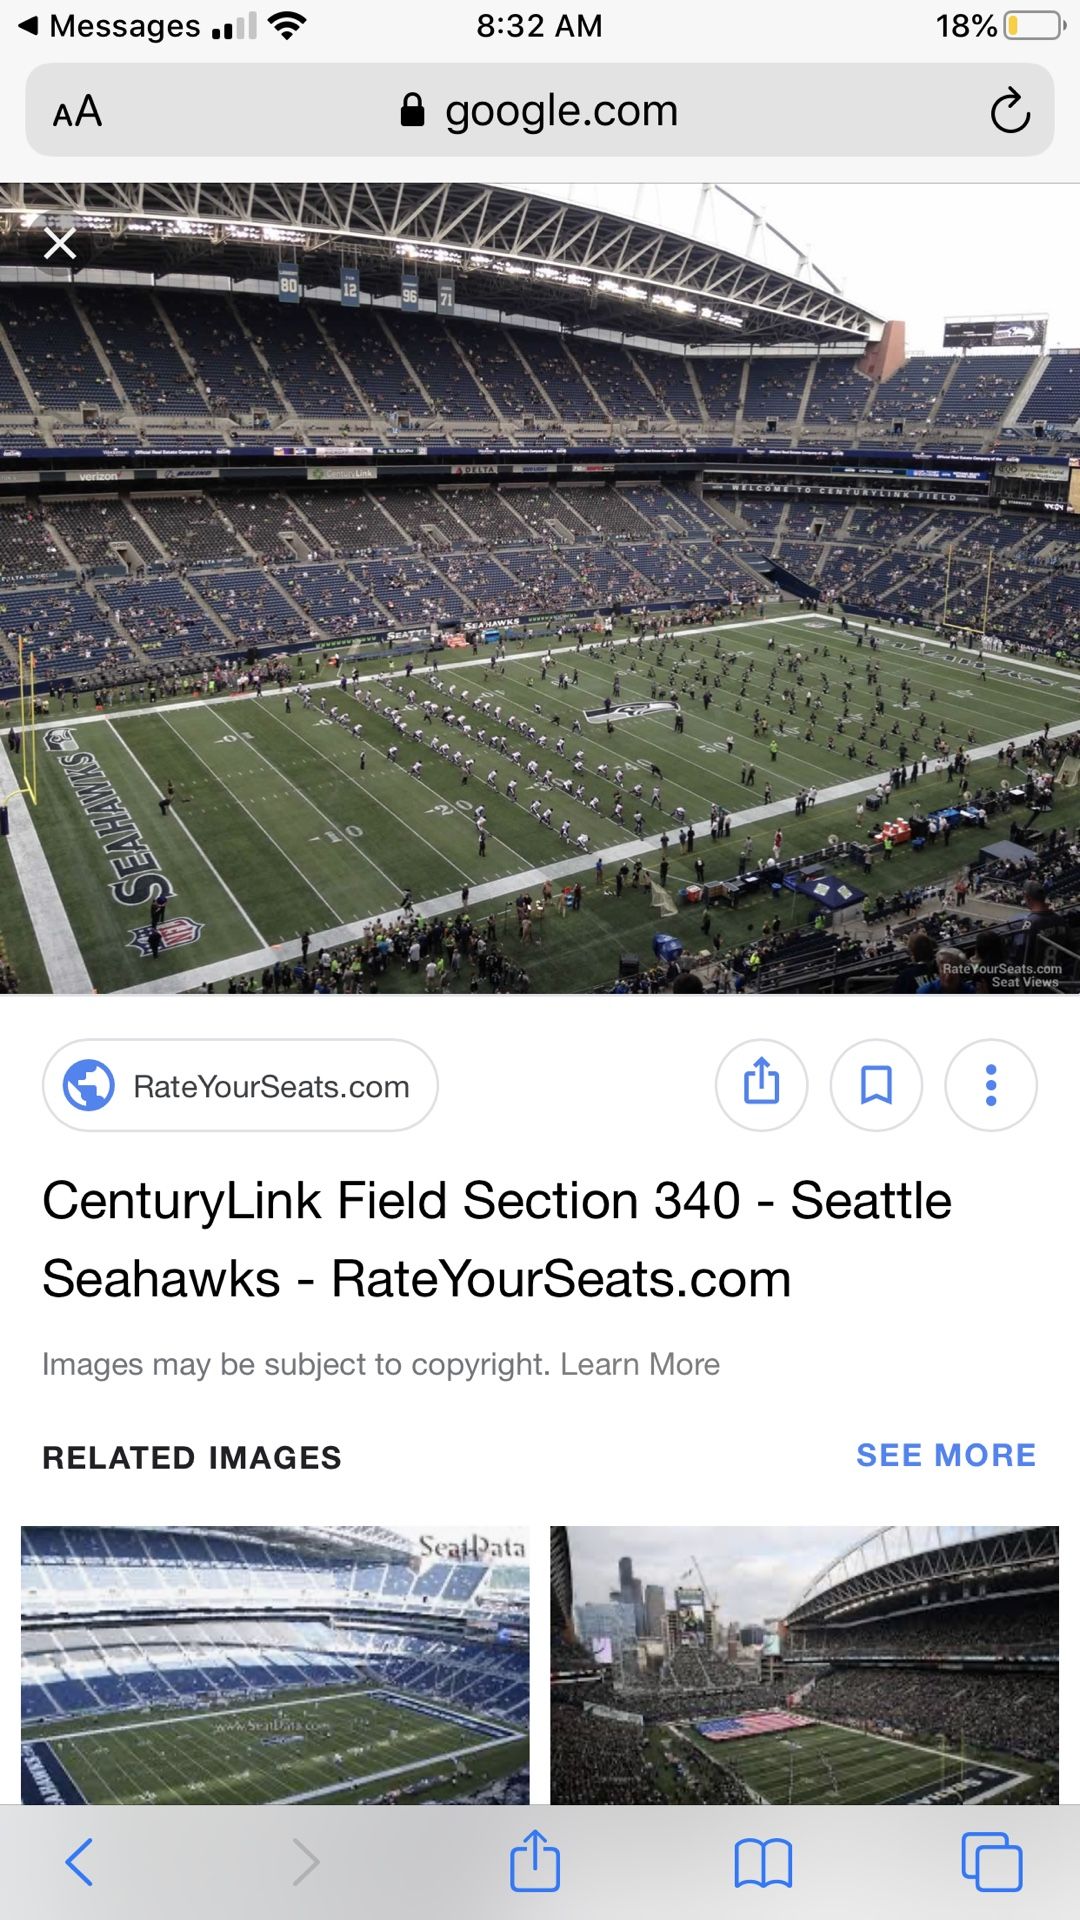 2 Seahawks vs Baltimore Ravens tickets. Price is for both tickets